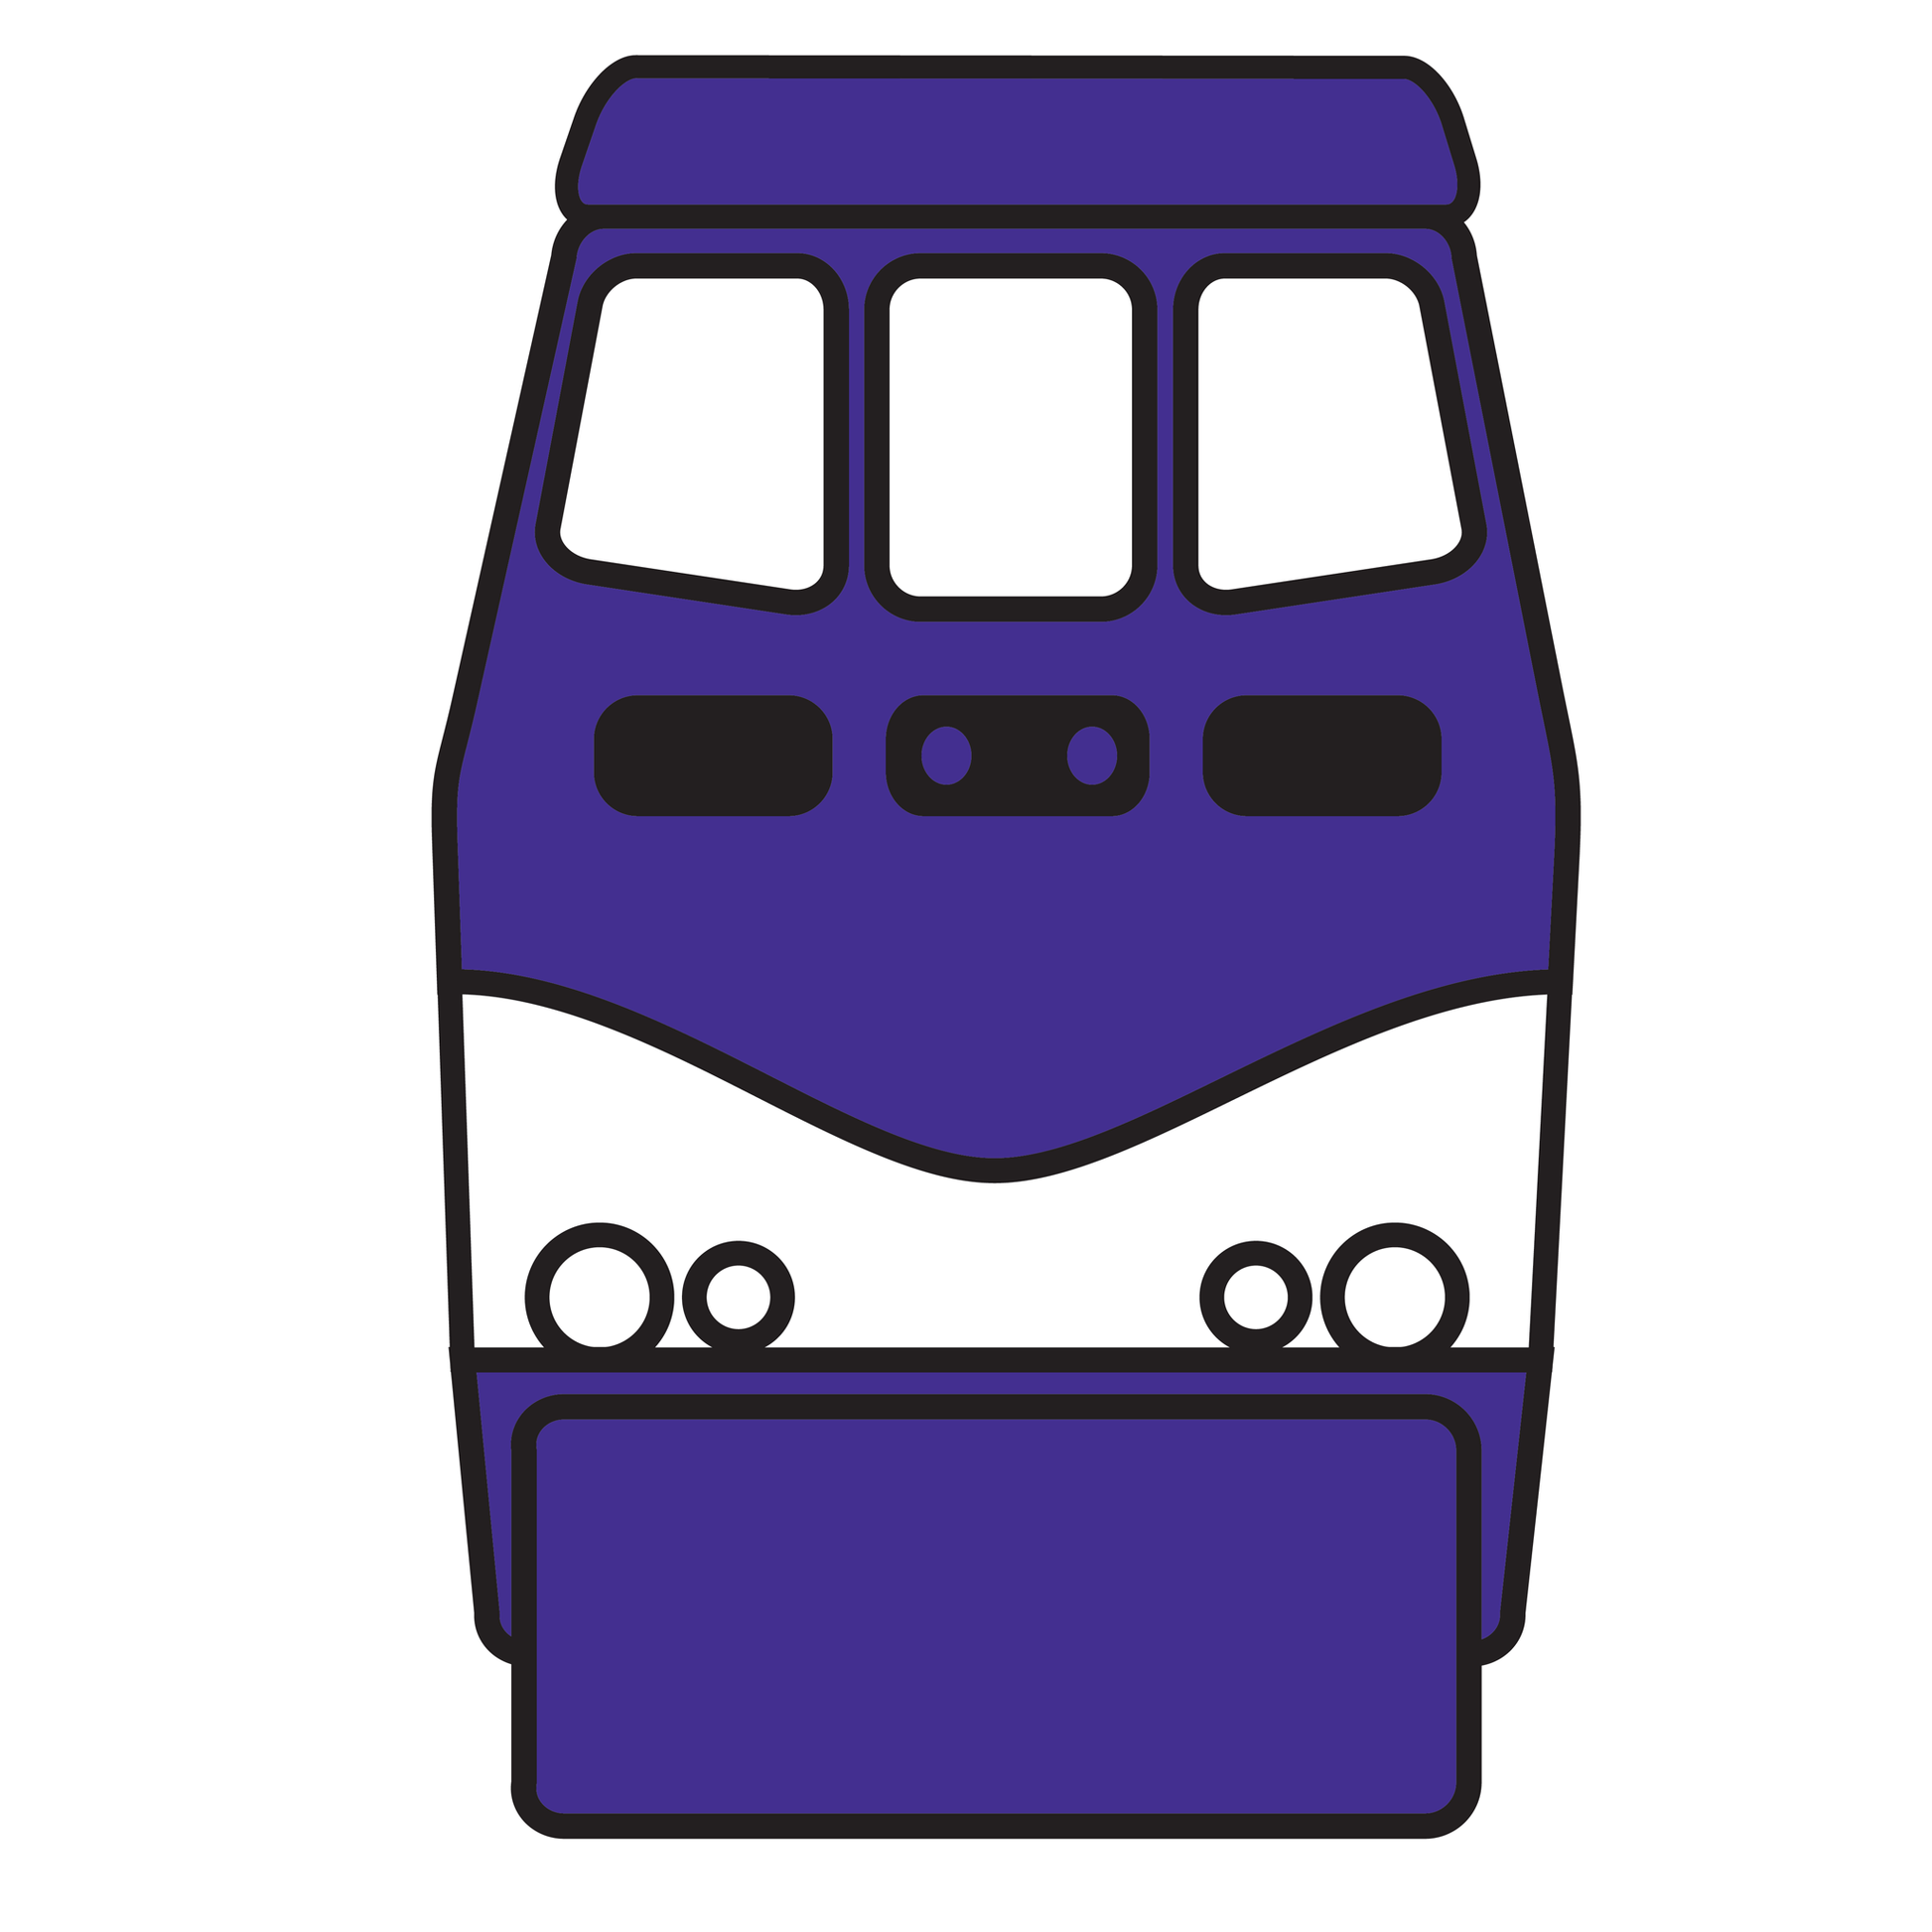 Simplified illustration of WestCoast Express train for playing card suit.